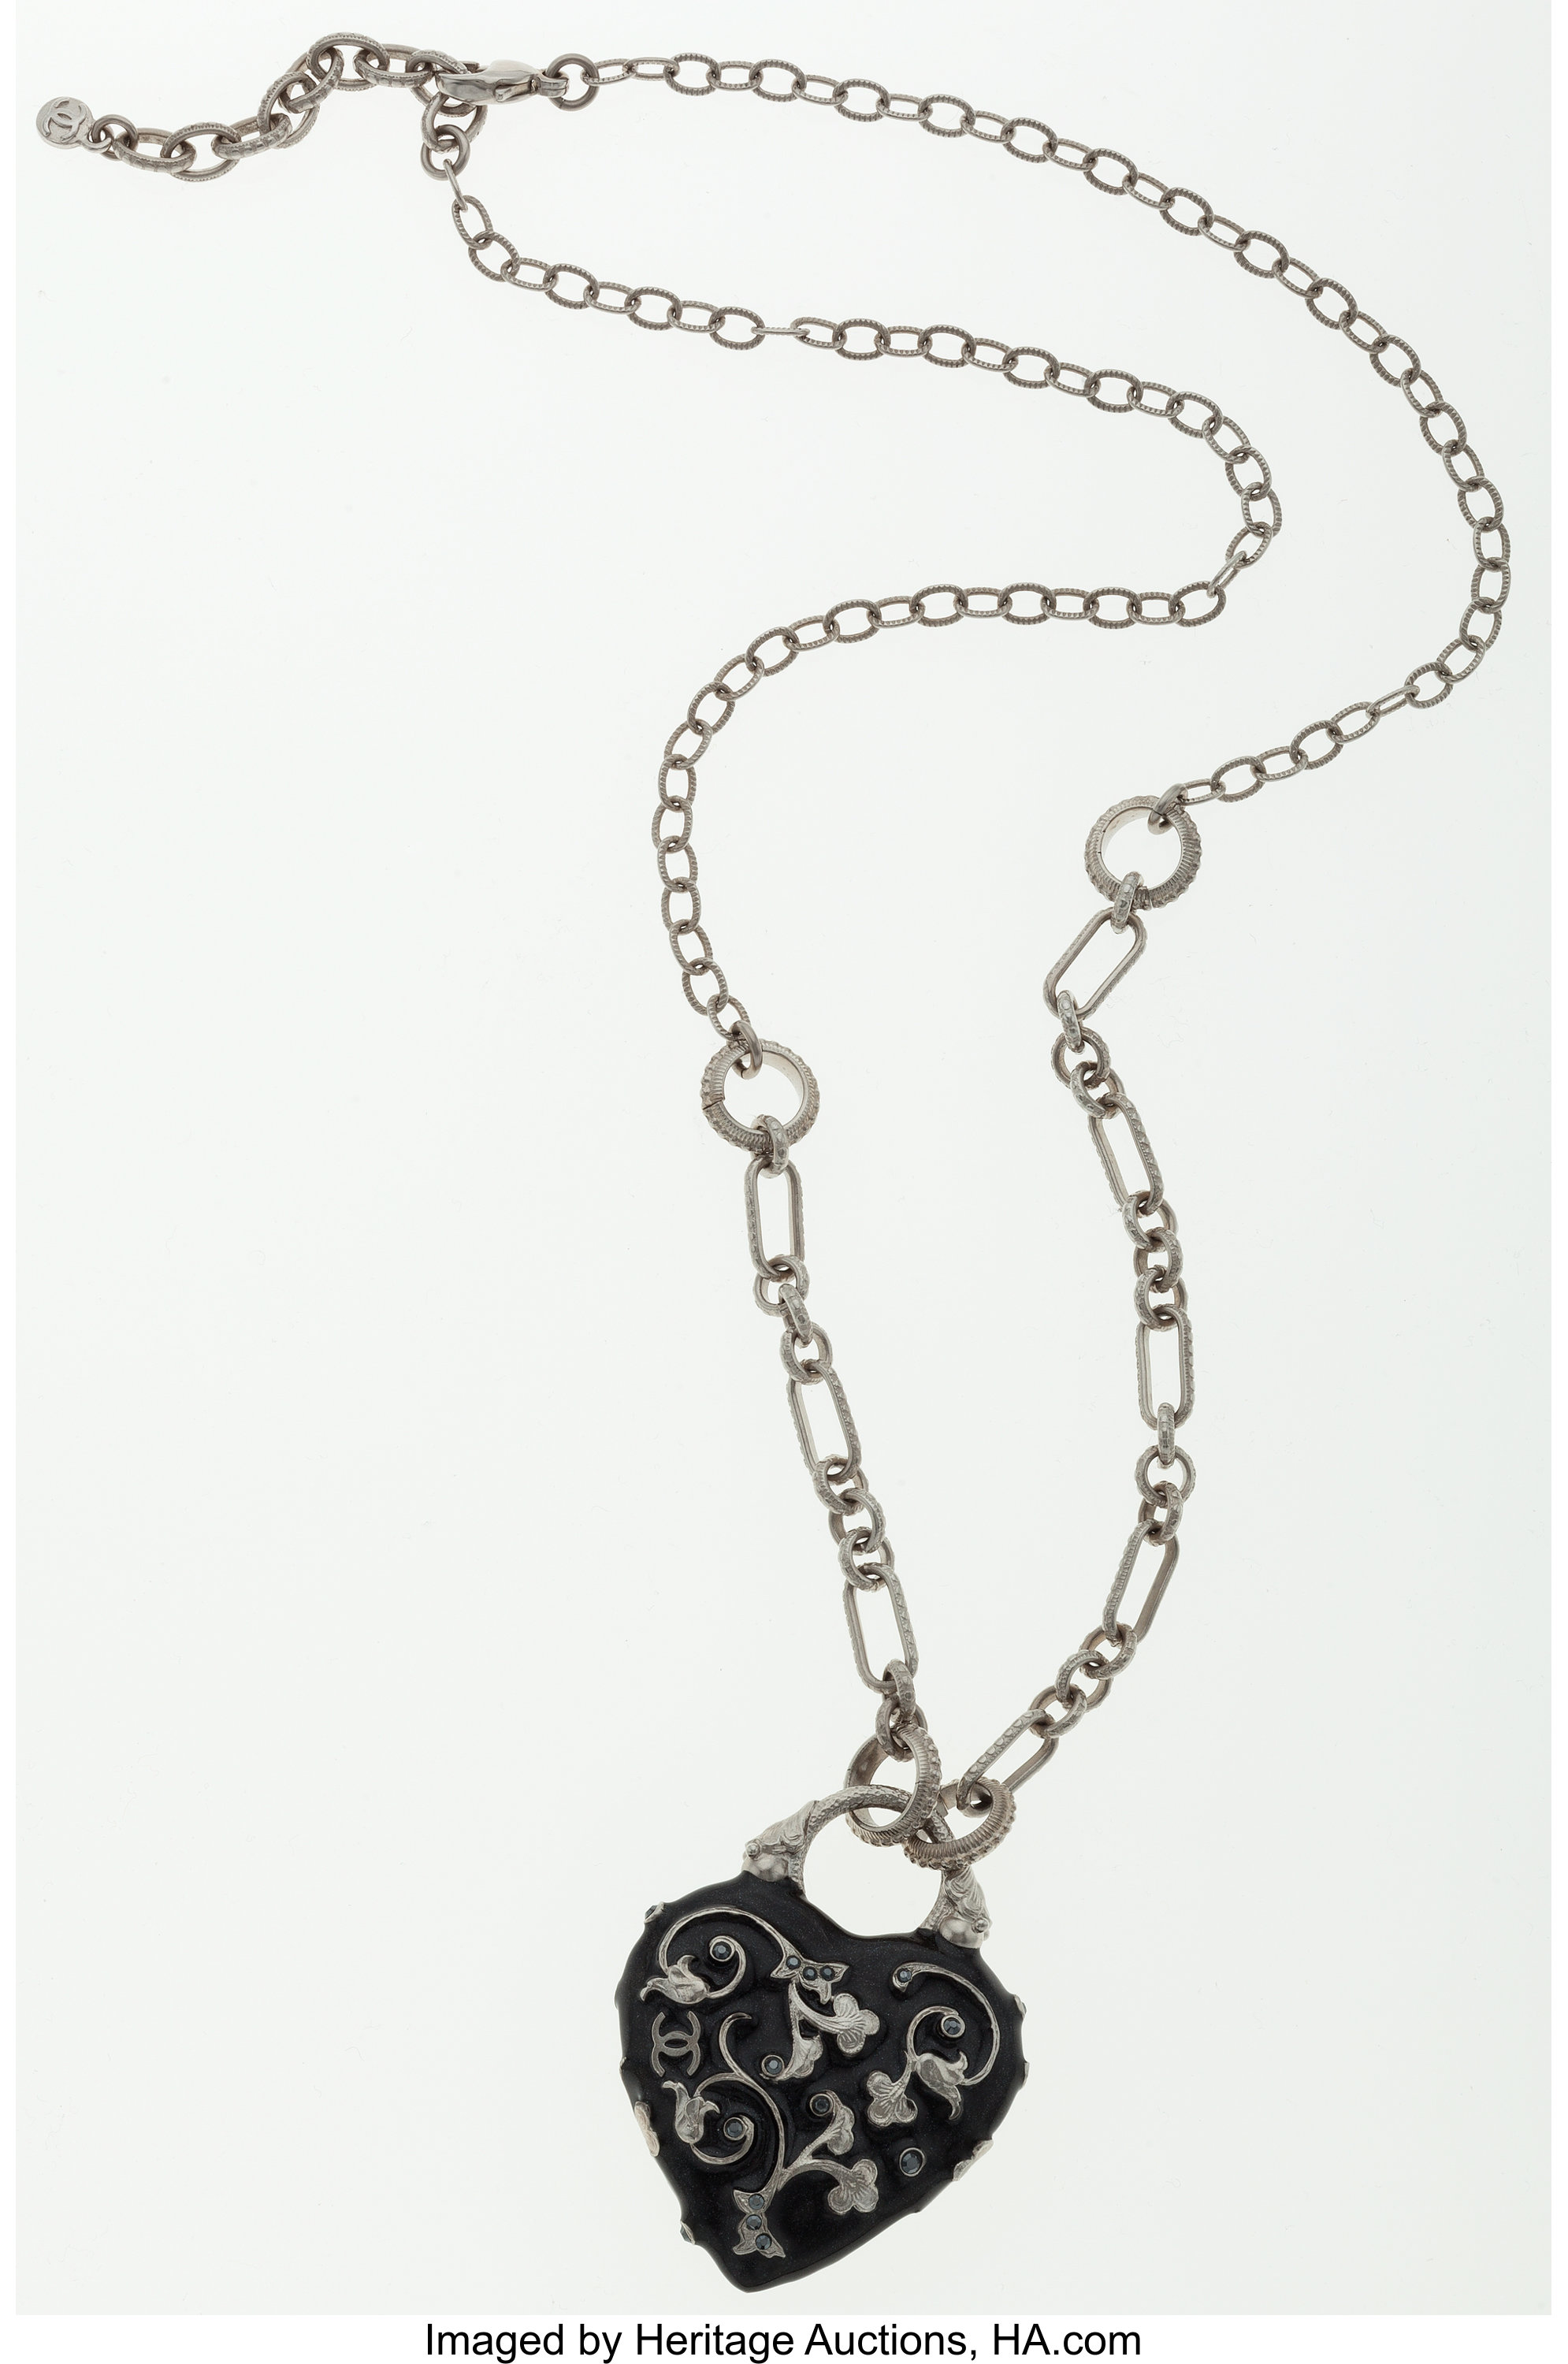 Chanel Black Glittered Enamel and Crystal Heart Pendant Necklace